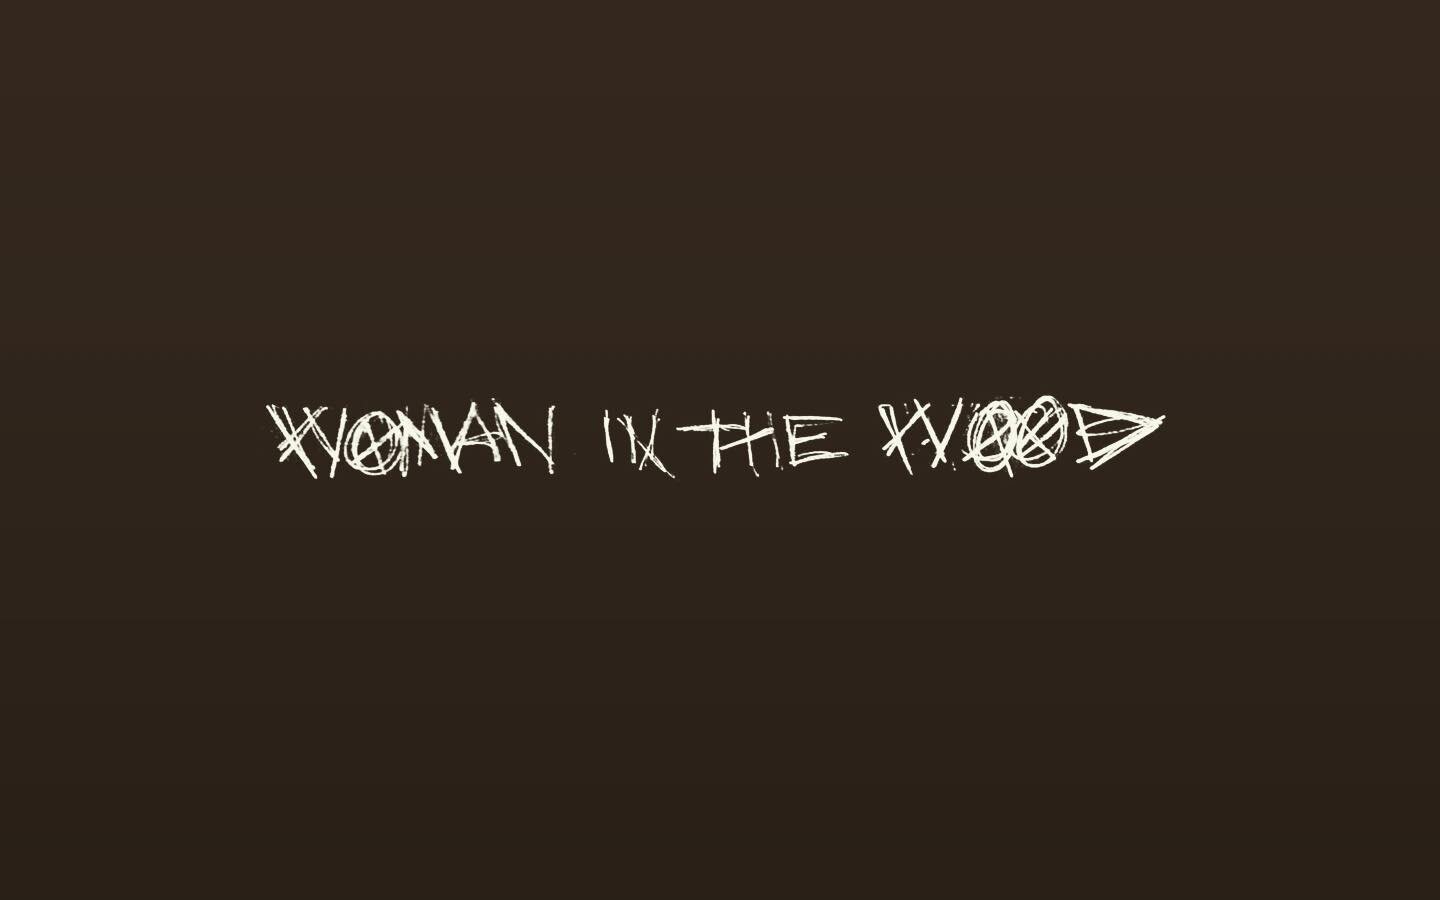 So proud this short film is almost done in post production.  Scoring revisions and final tweaking are almost complete.

This horror drama film gave me a voice about some difficult experiences in my life.  I loved hearing from women who related to the